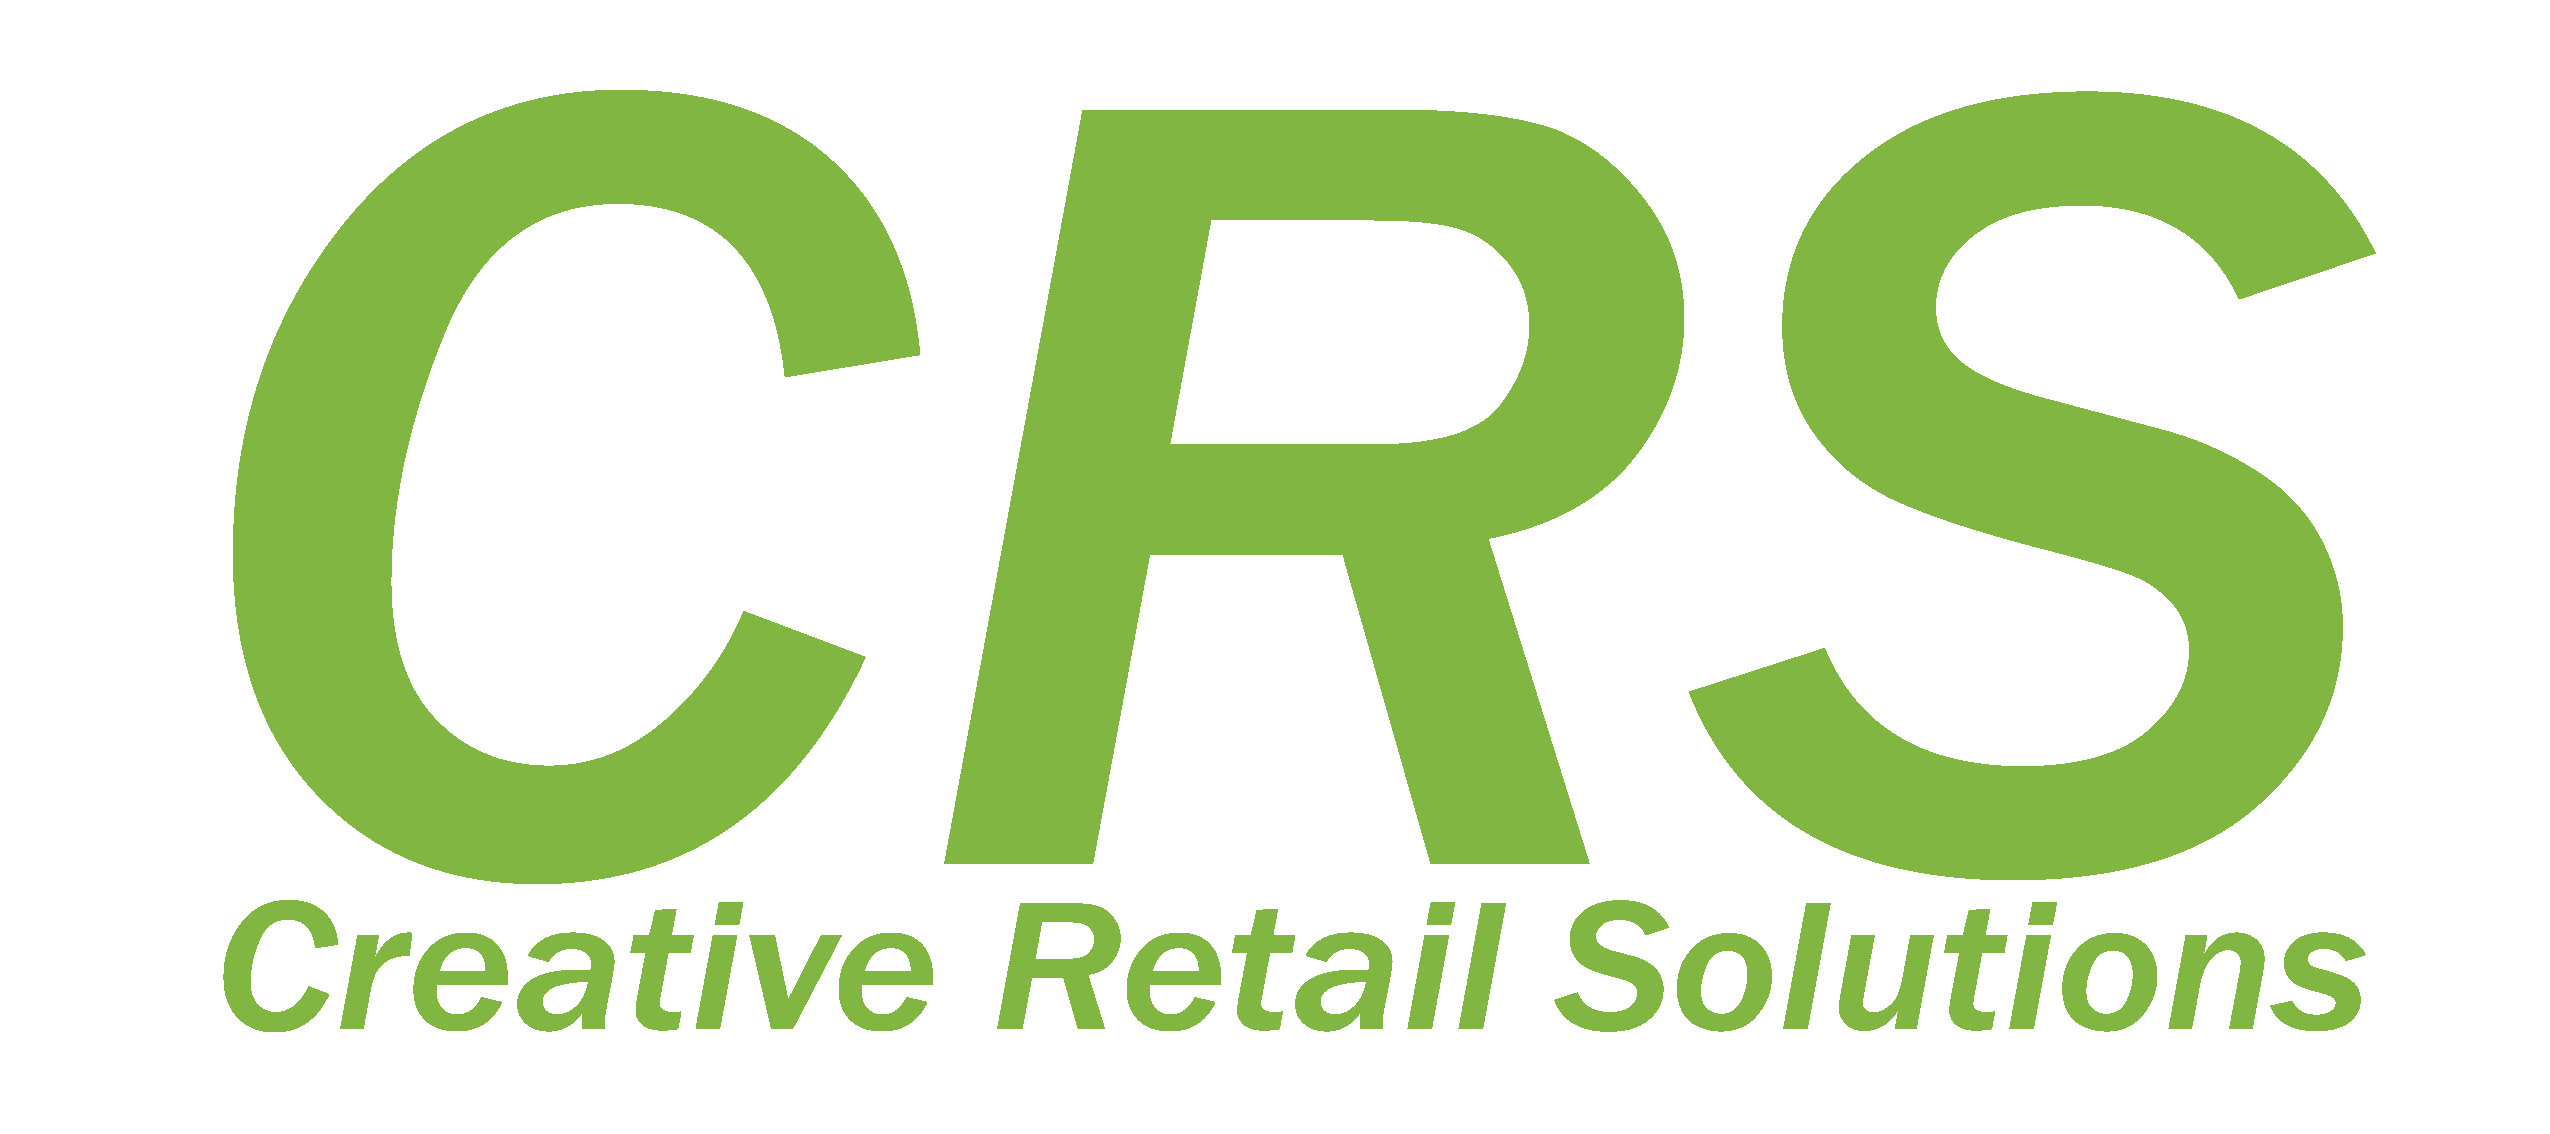 Creative Retail Solutions